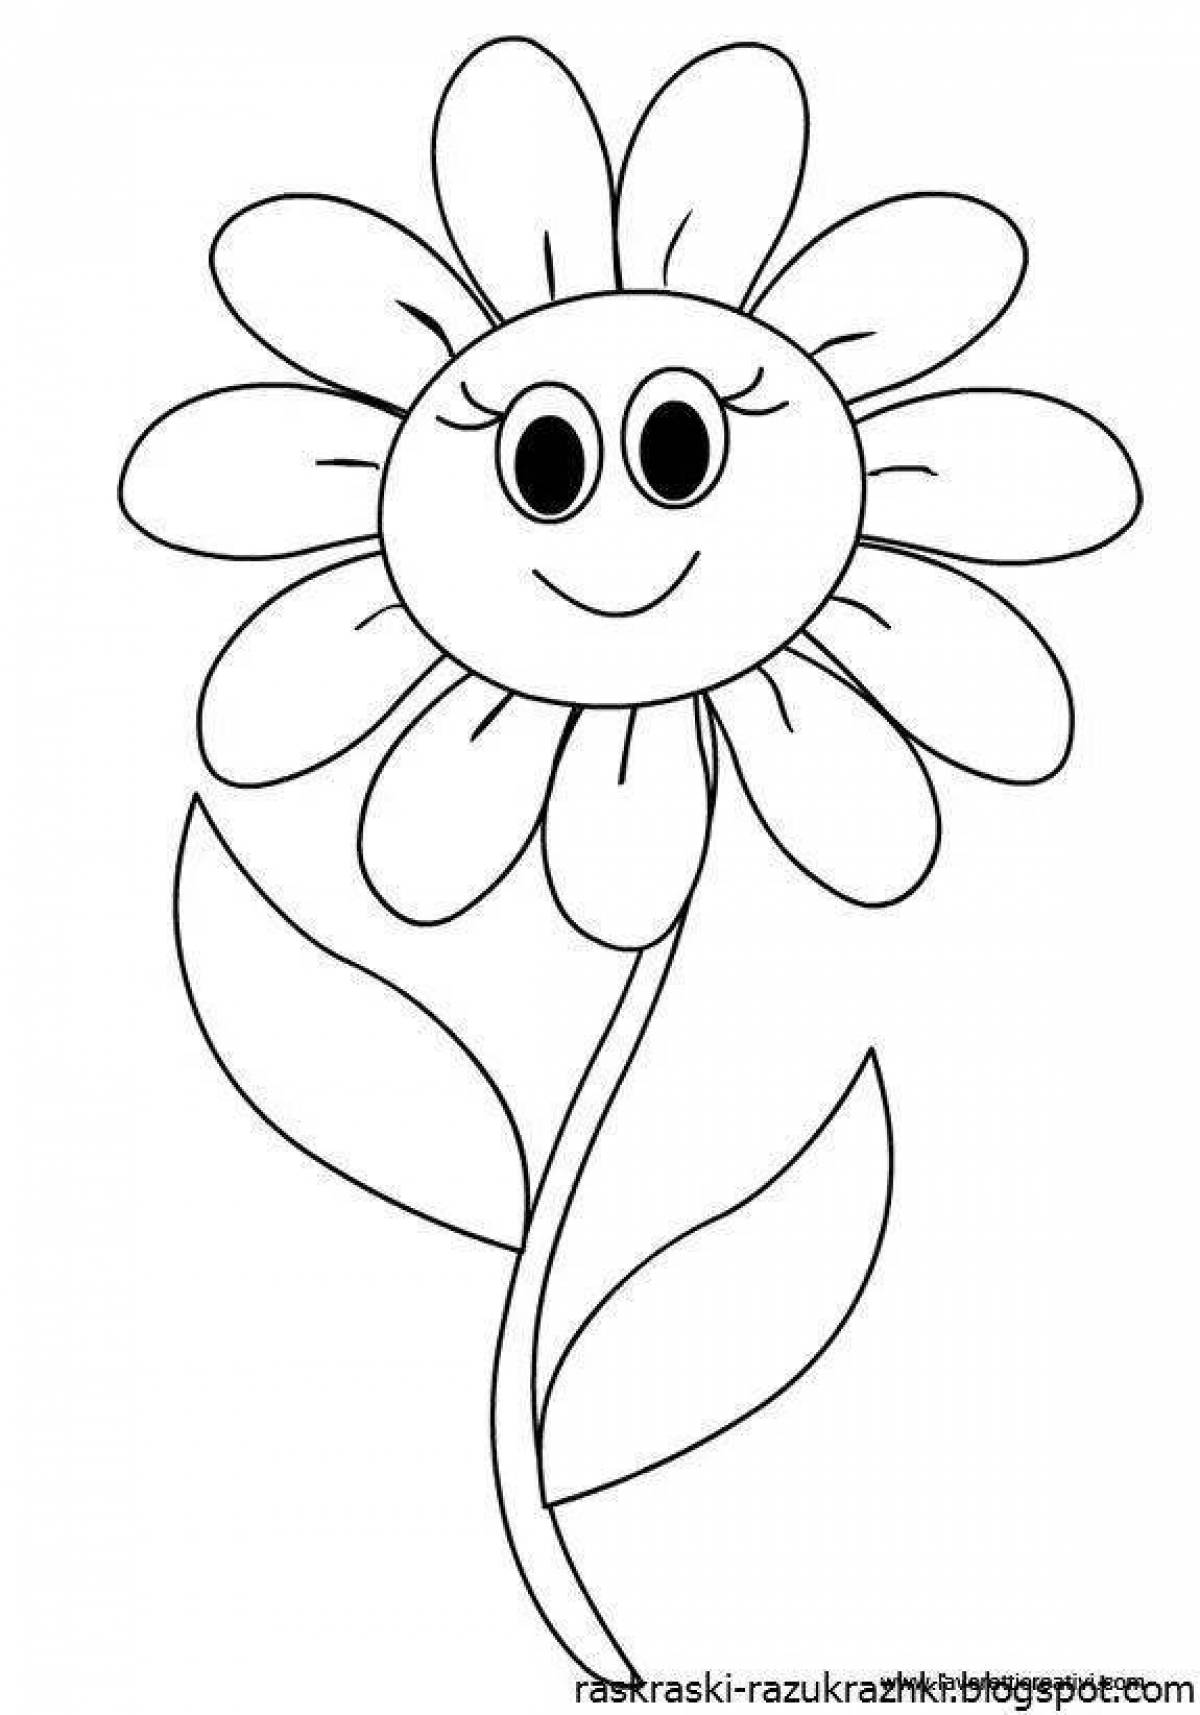 Colorful daisy coloring page